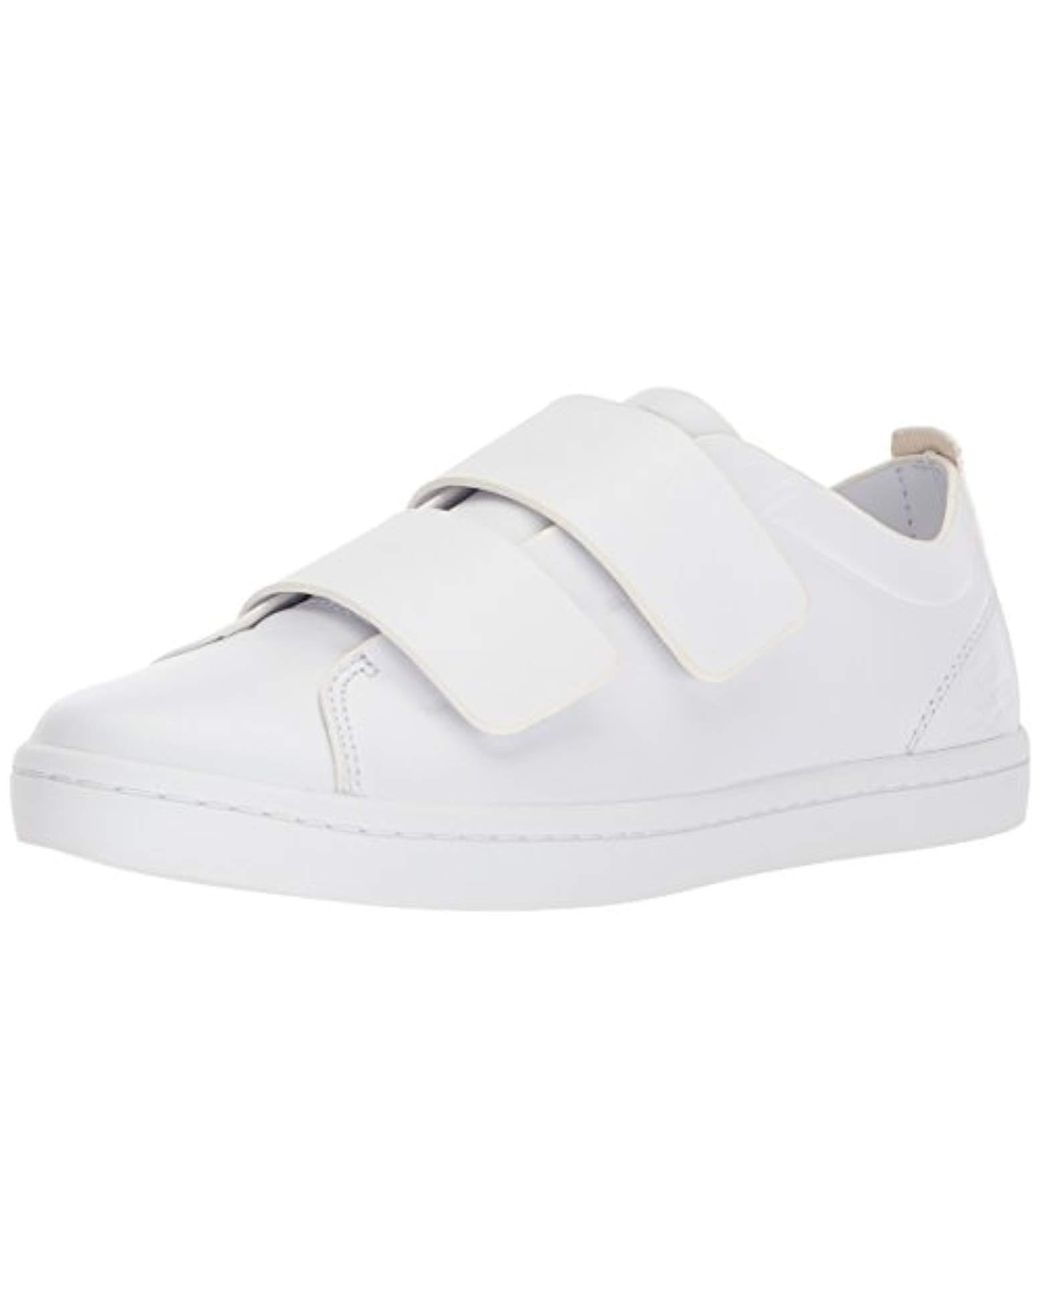 Lacoste Leather Straightset Strap 118 1 Caw Sneaker in White/White (White)  | Lyst